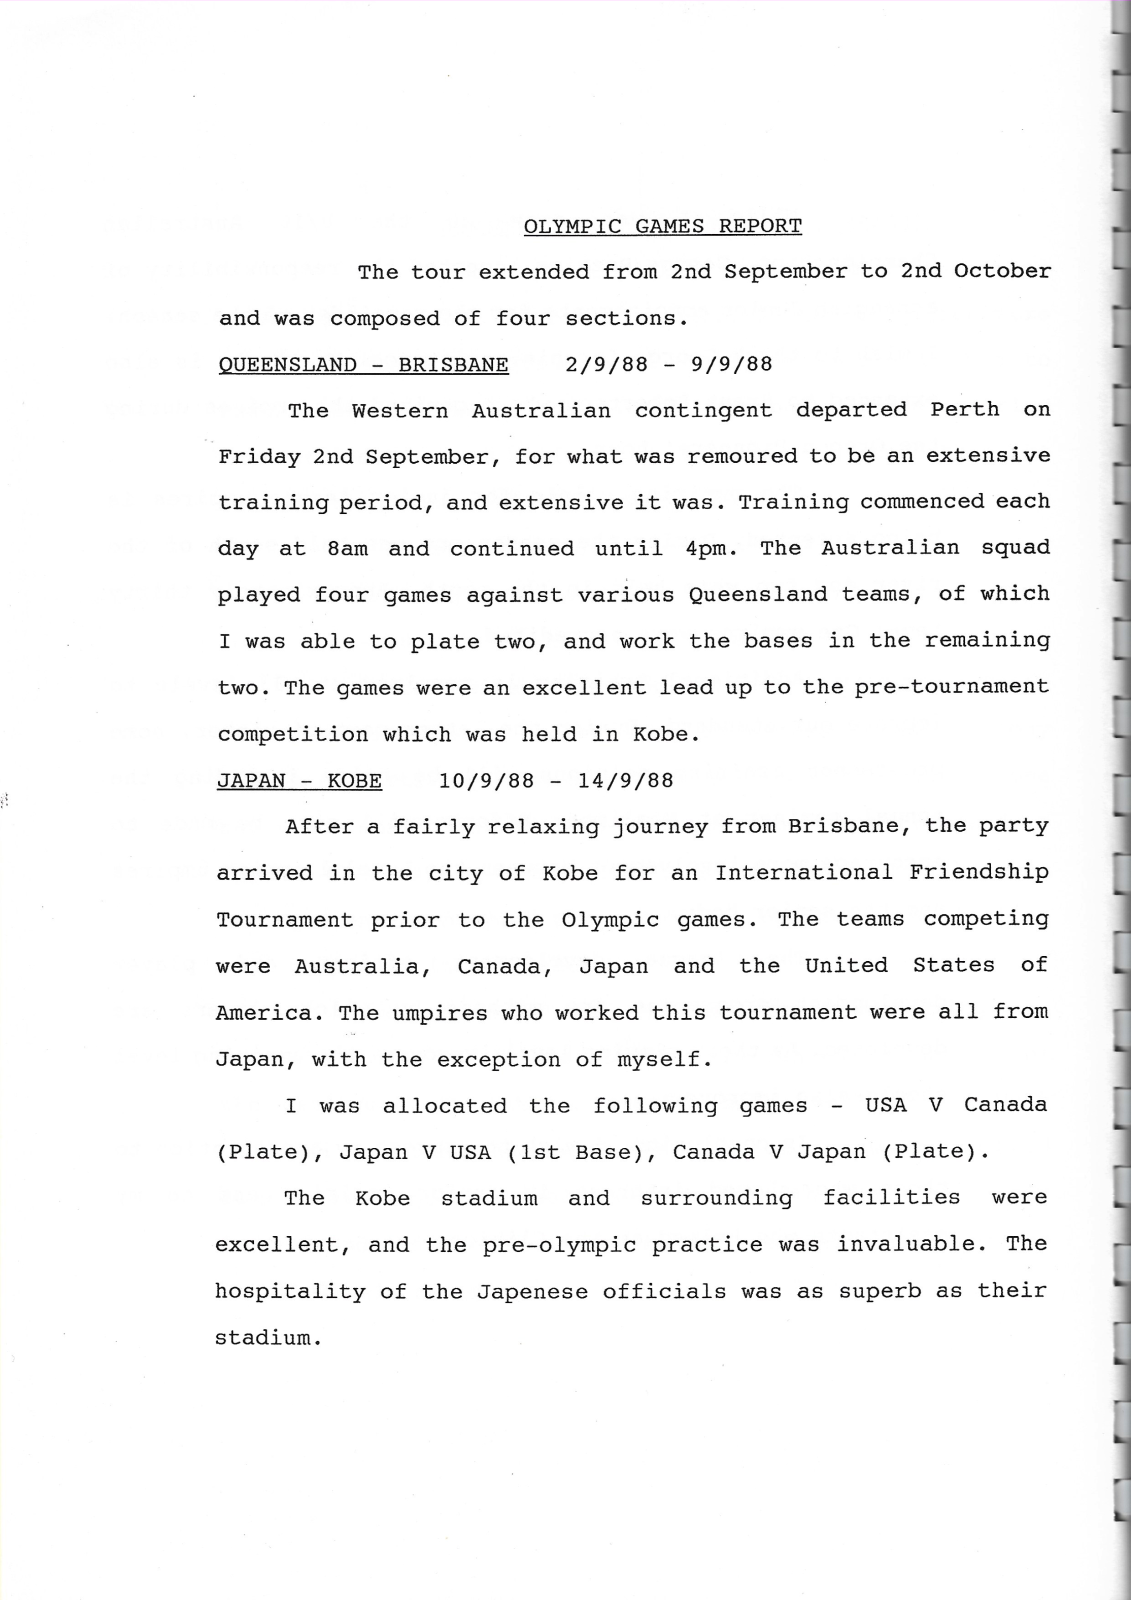 WA Baseball Umpires' Assoc. 1989 annual report (1988 Olympics report 1st page)